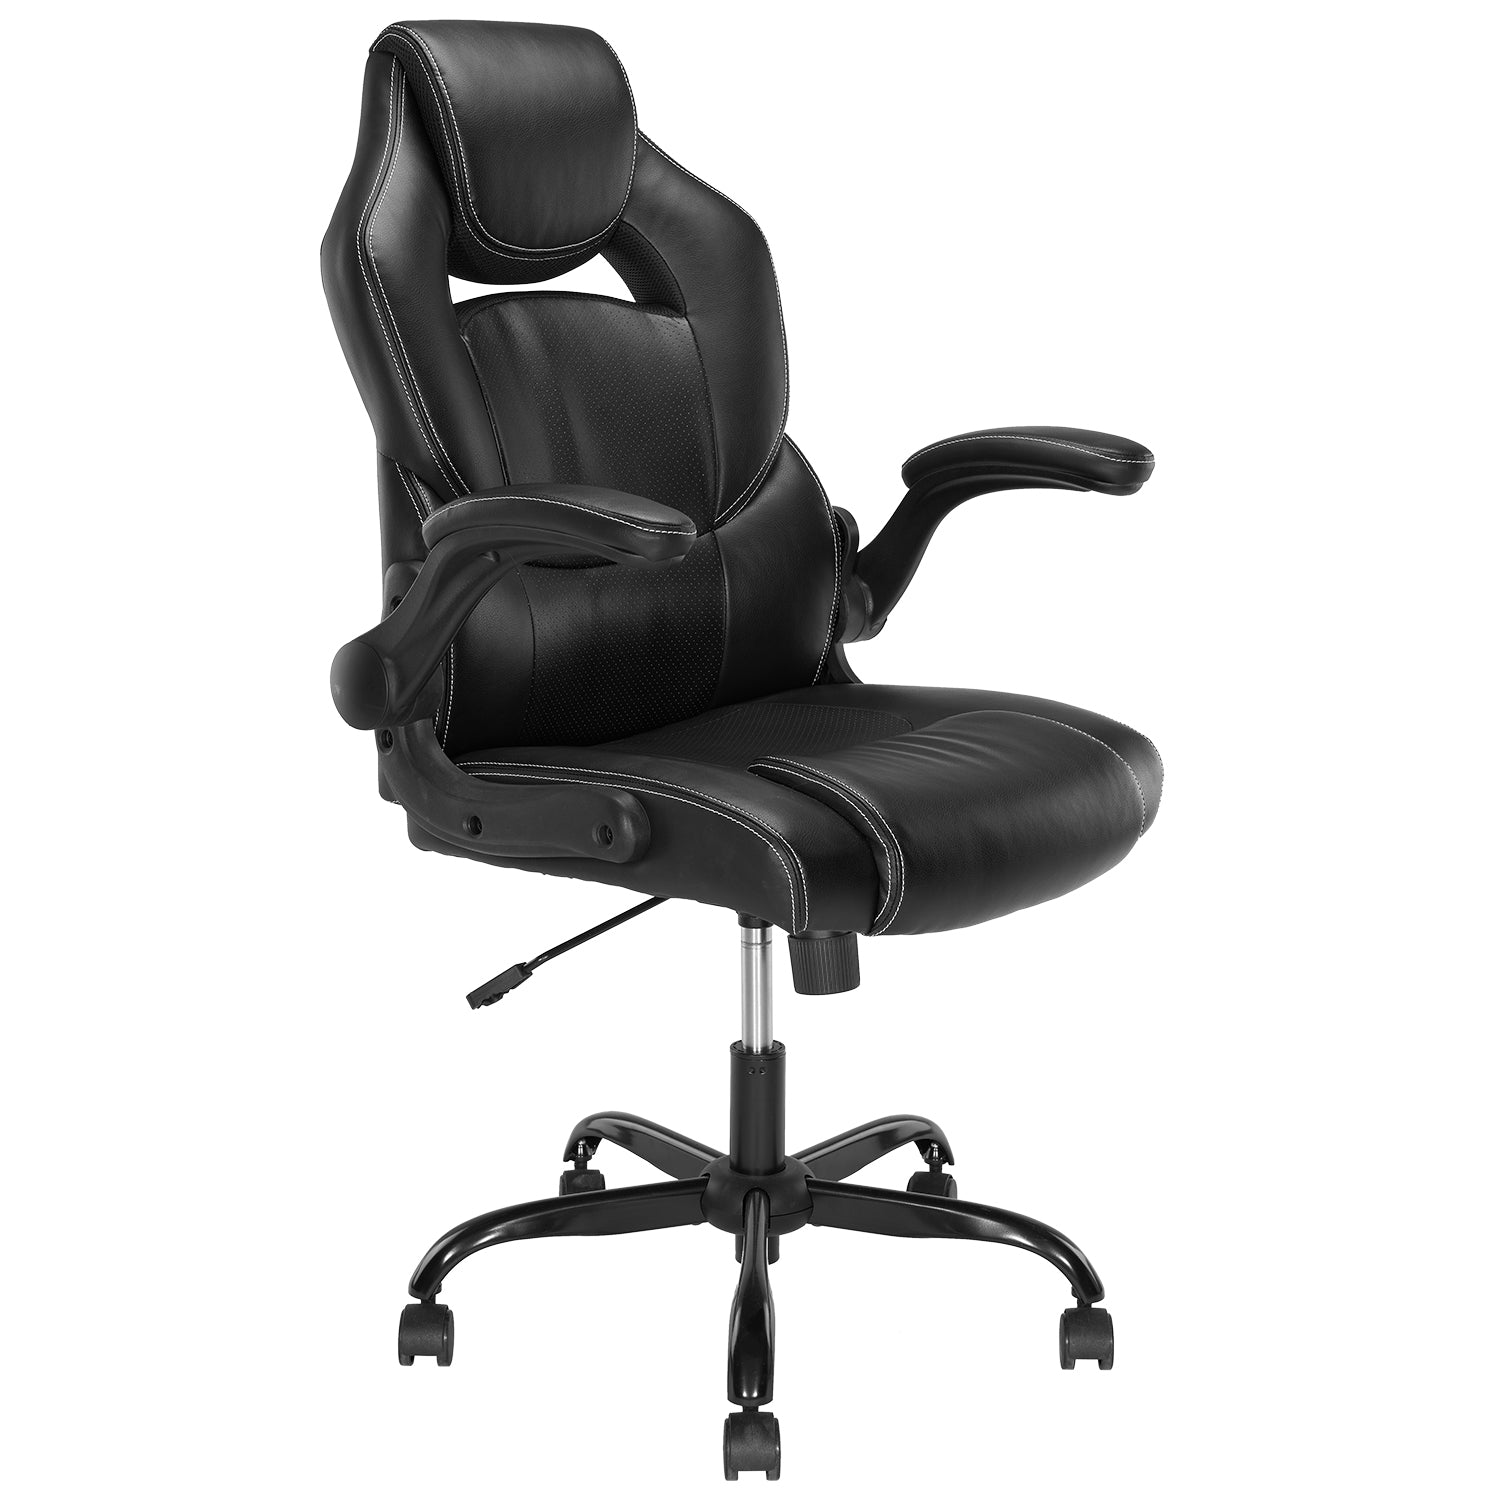 CLATINA Computer Gaming Chair PU Leather Ergonomic Gamer Chairs, Height Adjustable Swivel Executive Desk Chair with Flip-up Armrest for Adults Teens Kids Men Women